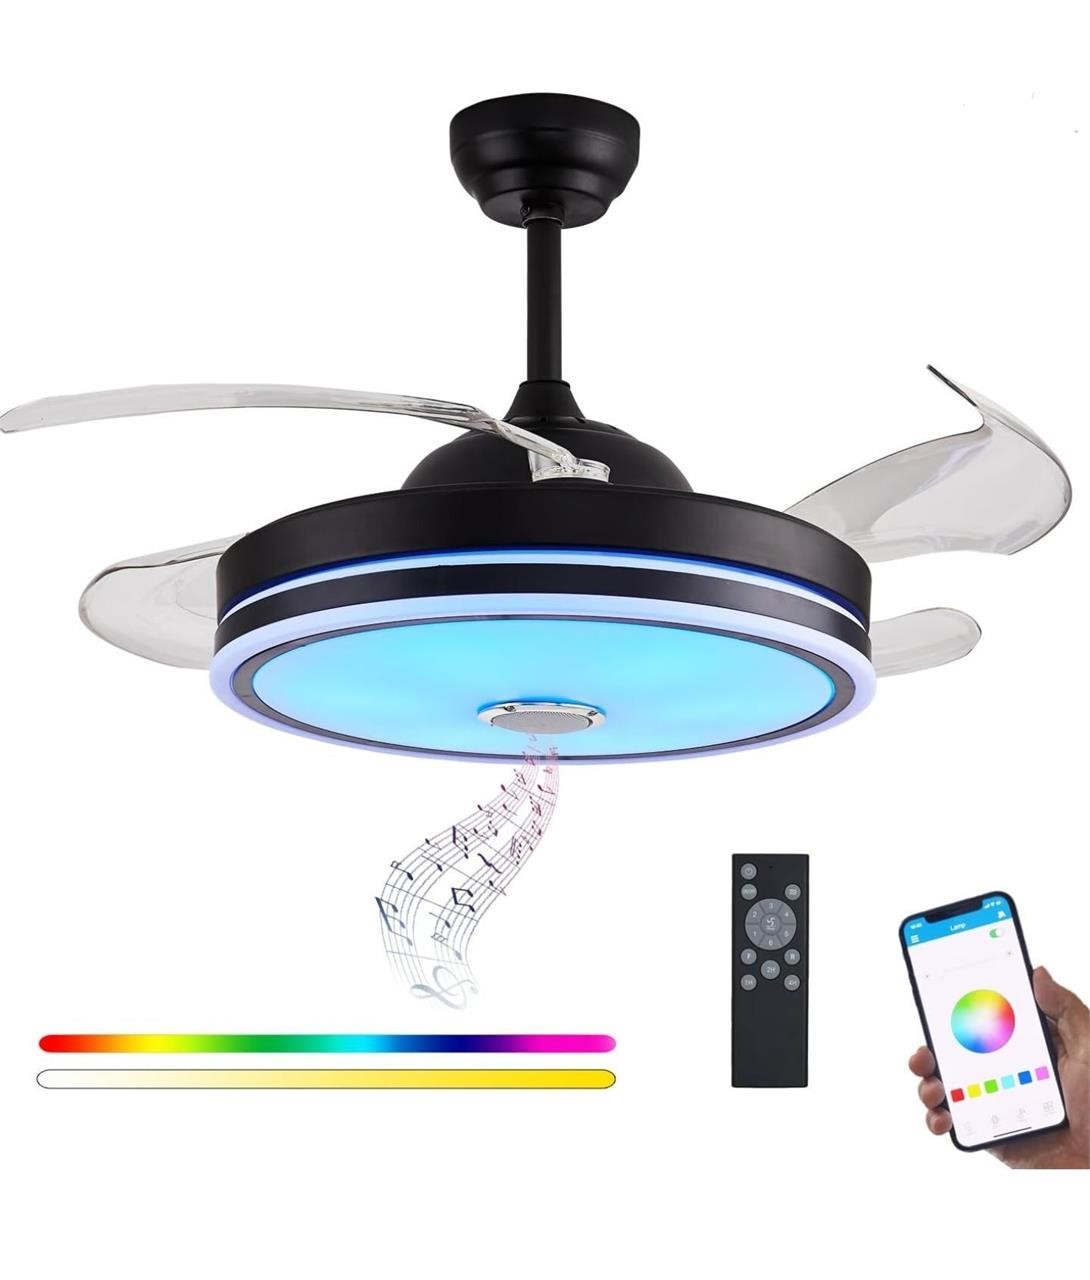 ($210) DFL 36" Music Ceiling Fan with Light,